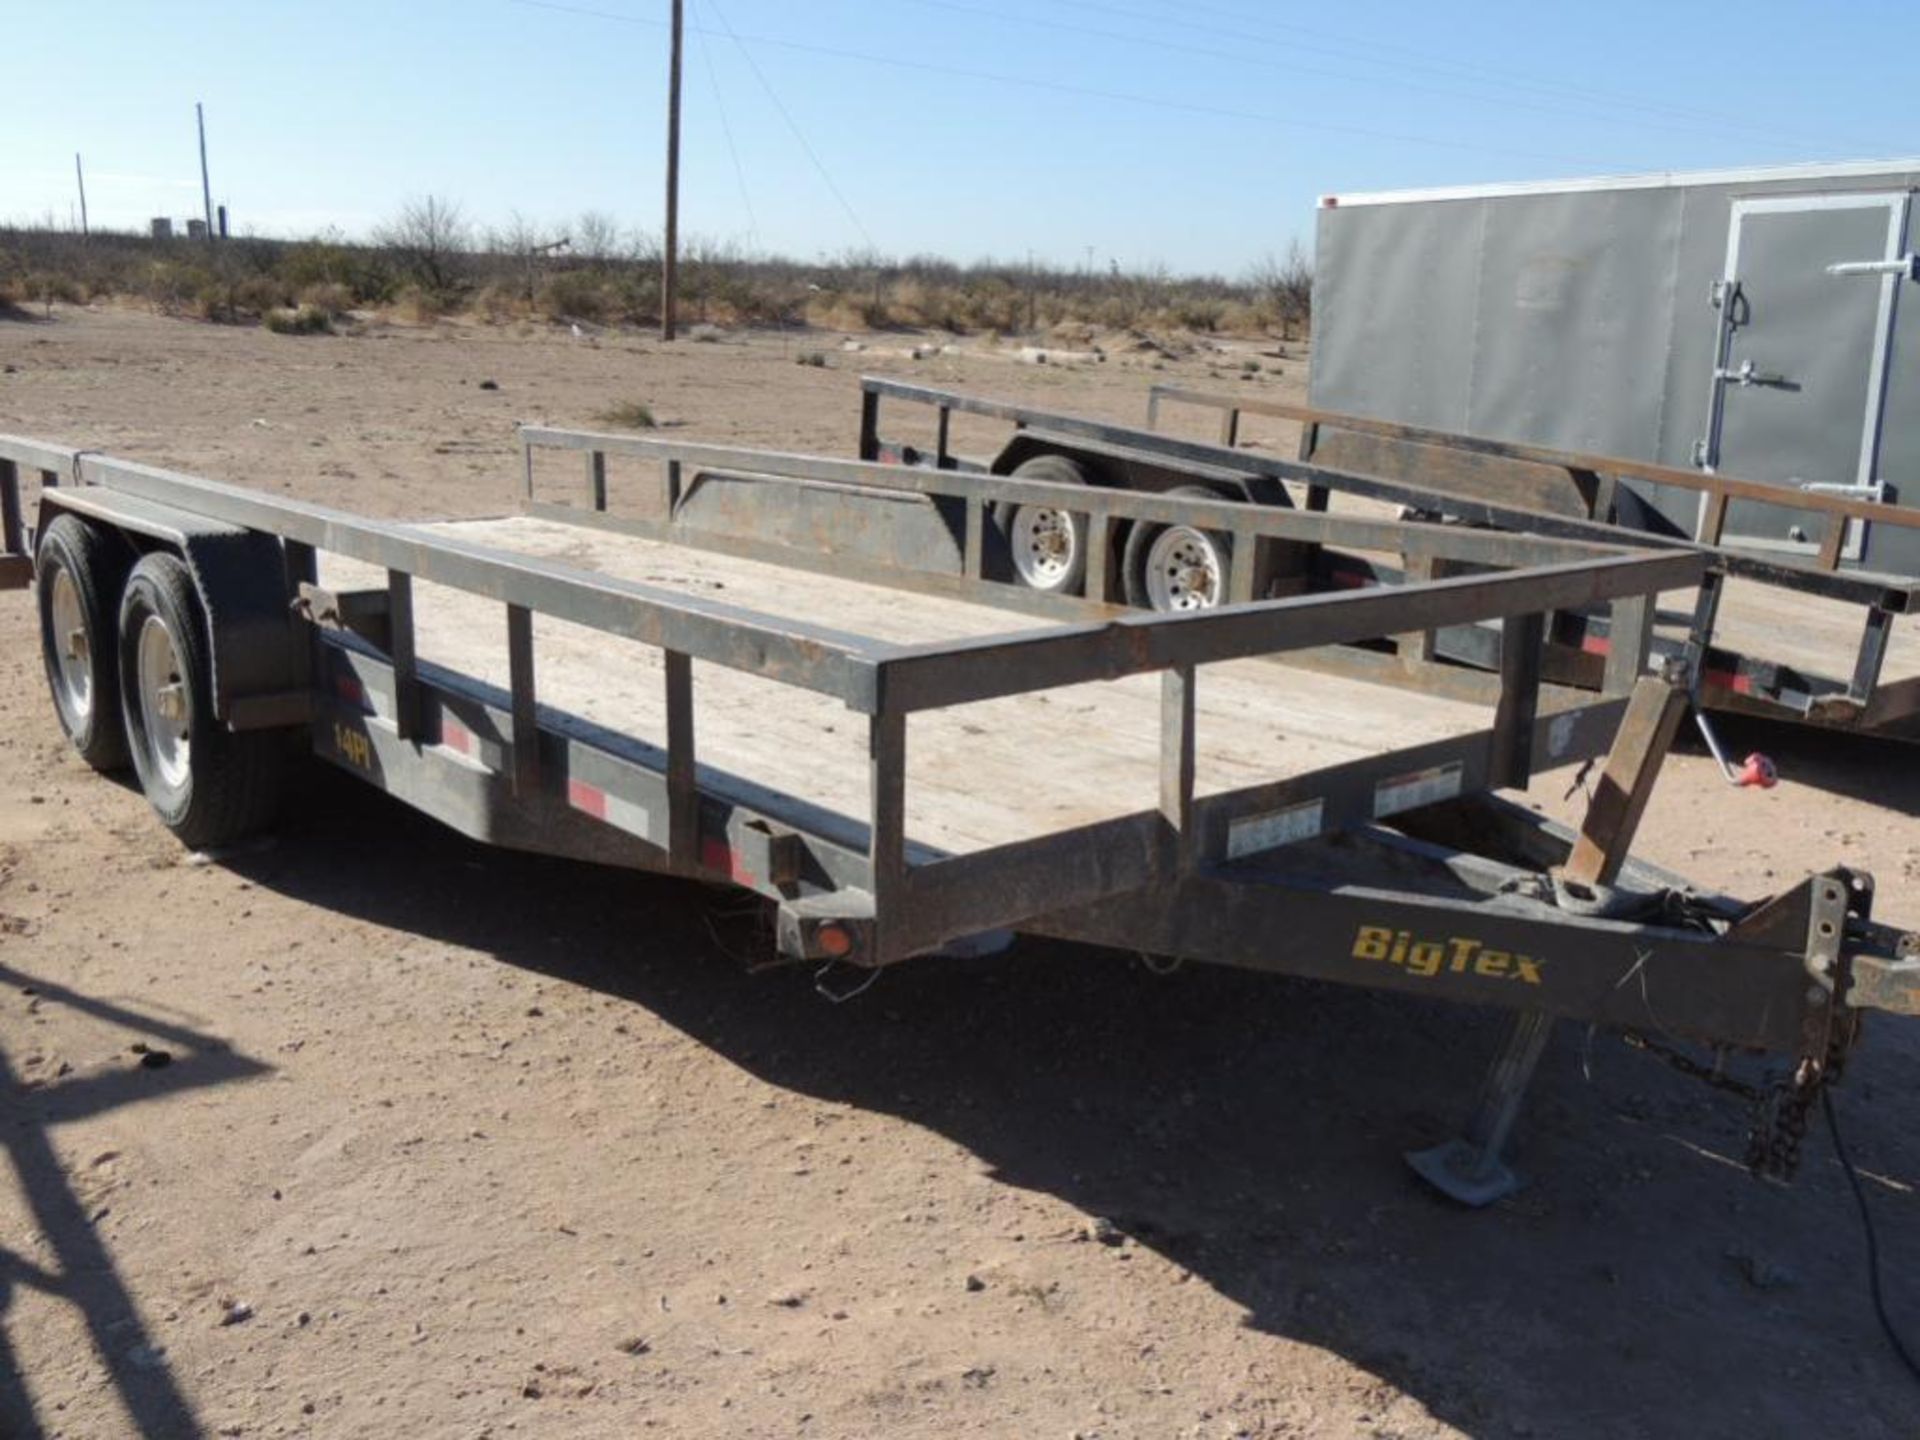 2014 Big Tex Model 14PI-18GY T/A Utility Trailer, VIN 16VPX1828E2321791, 14K AWR, 7 ft. x18 ft. with - Image 2 of 4